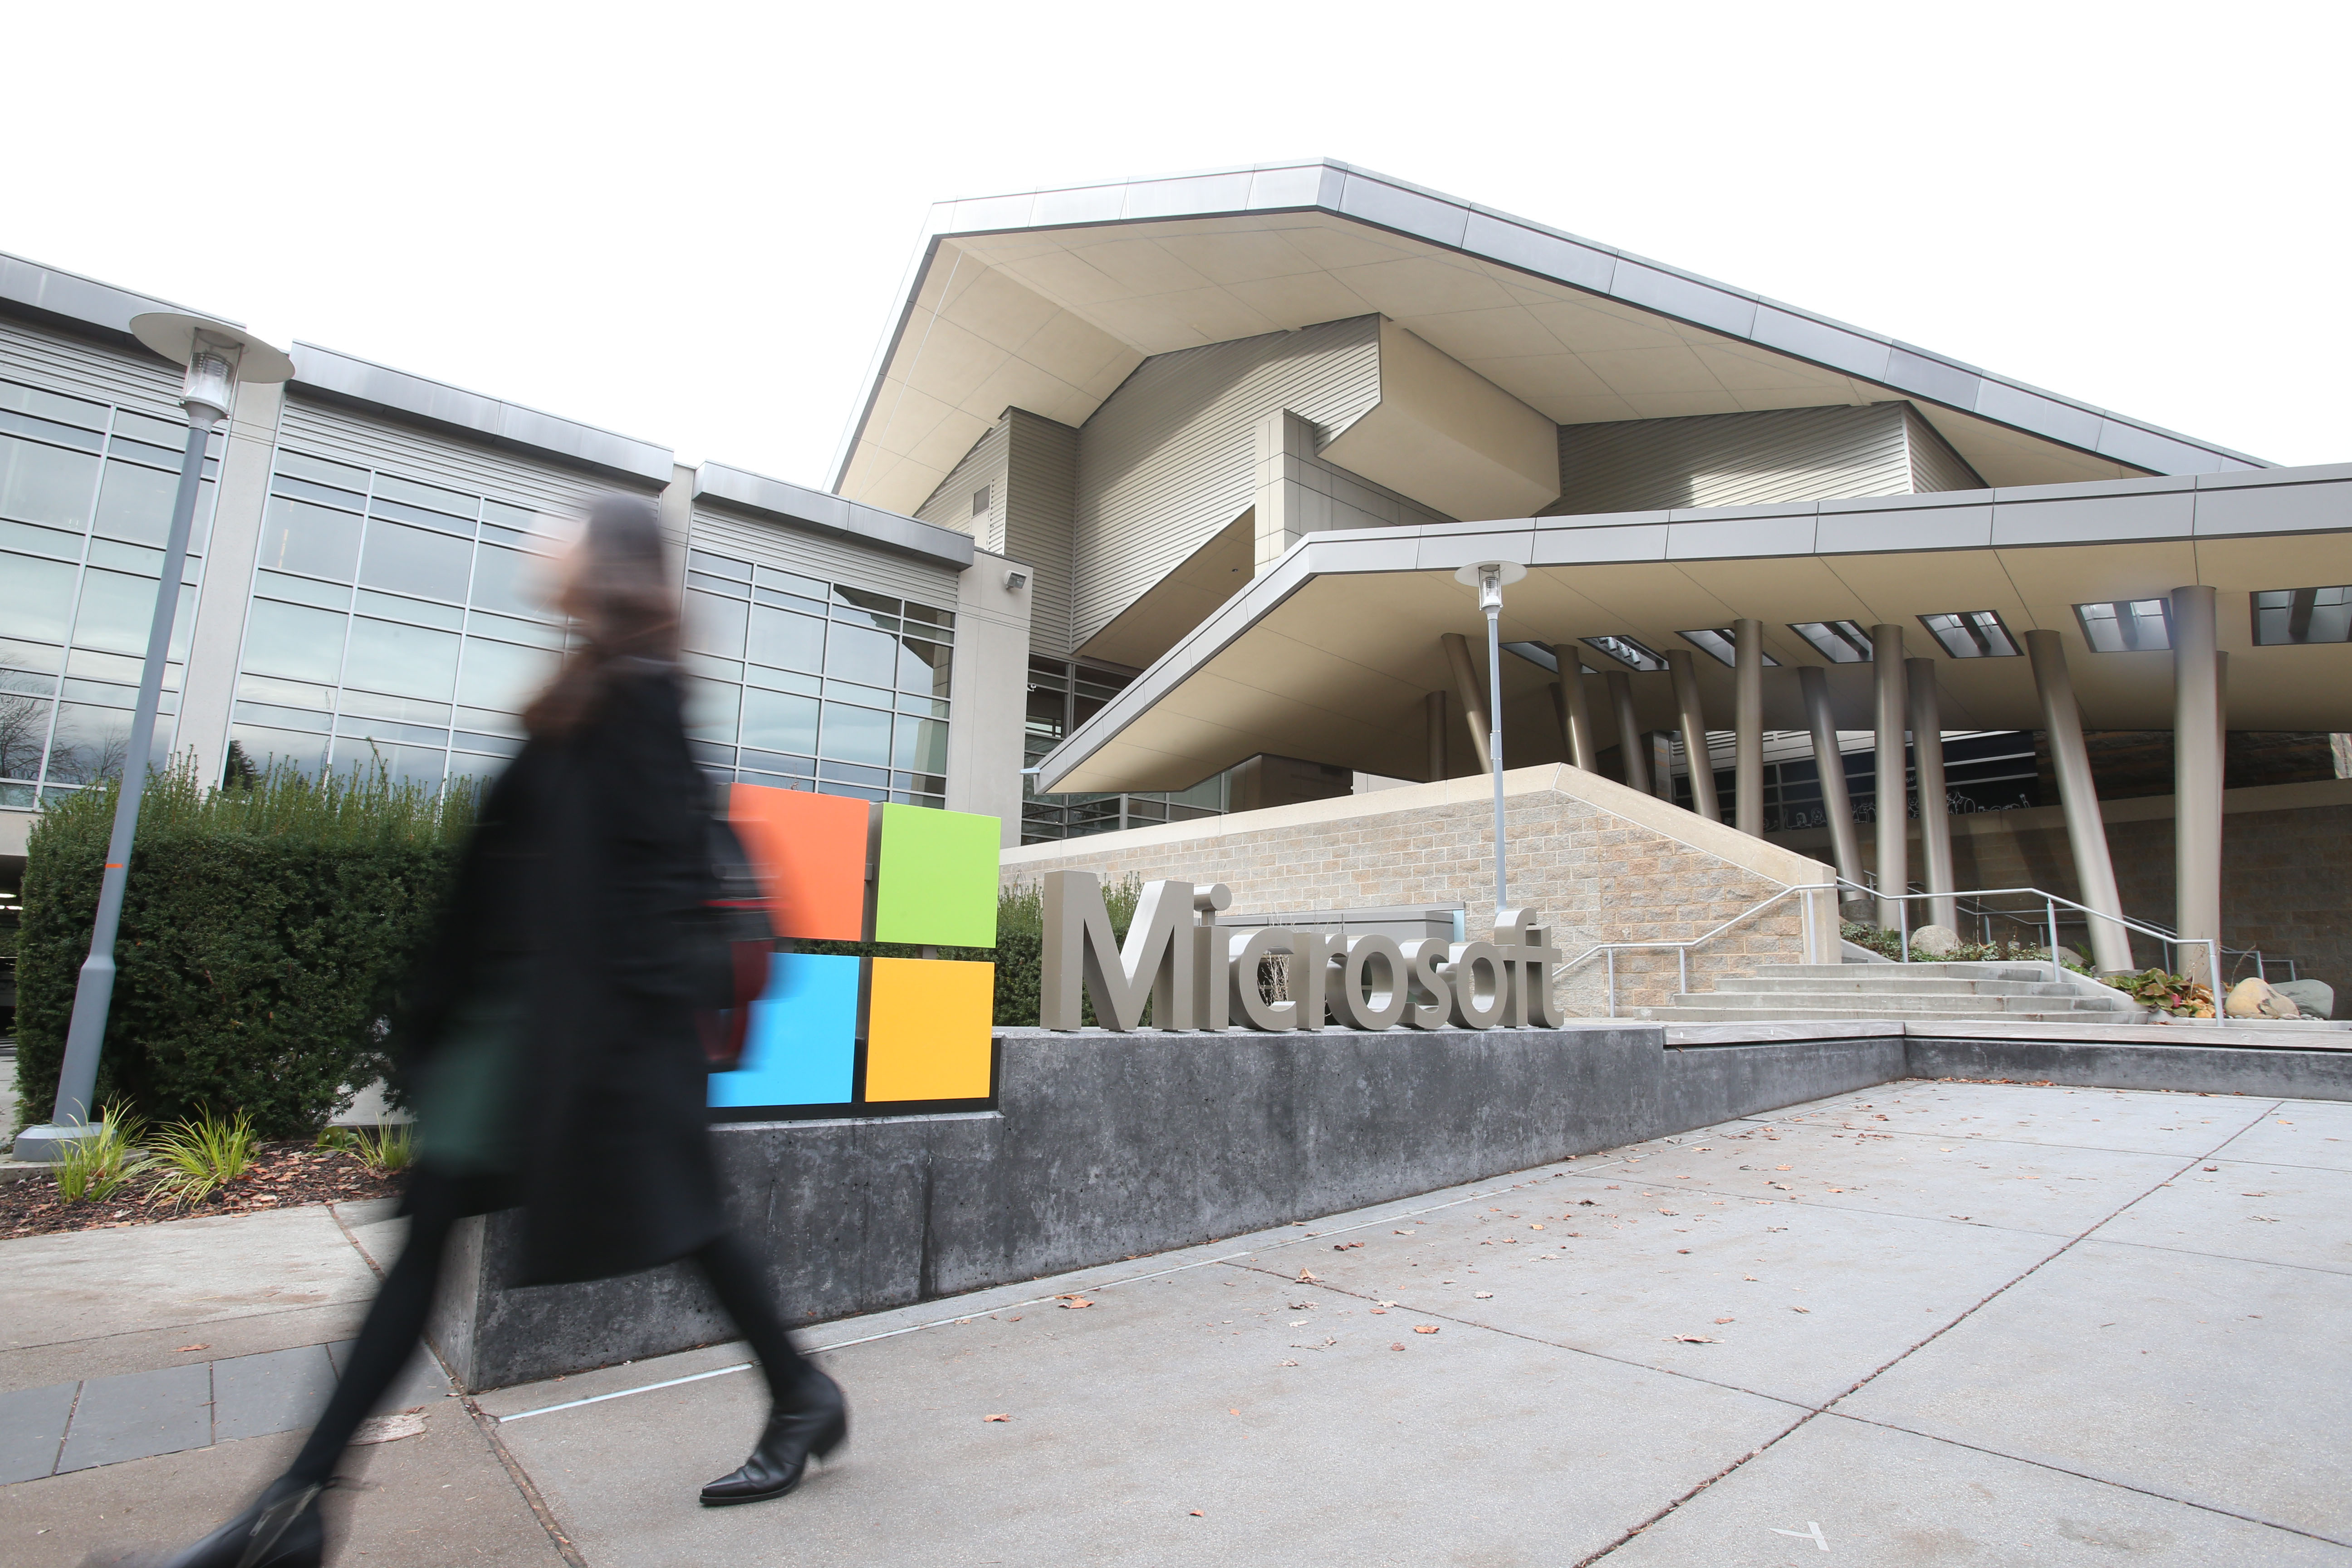 Microsoft delays full reopening of its offices until at least September